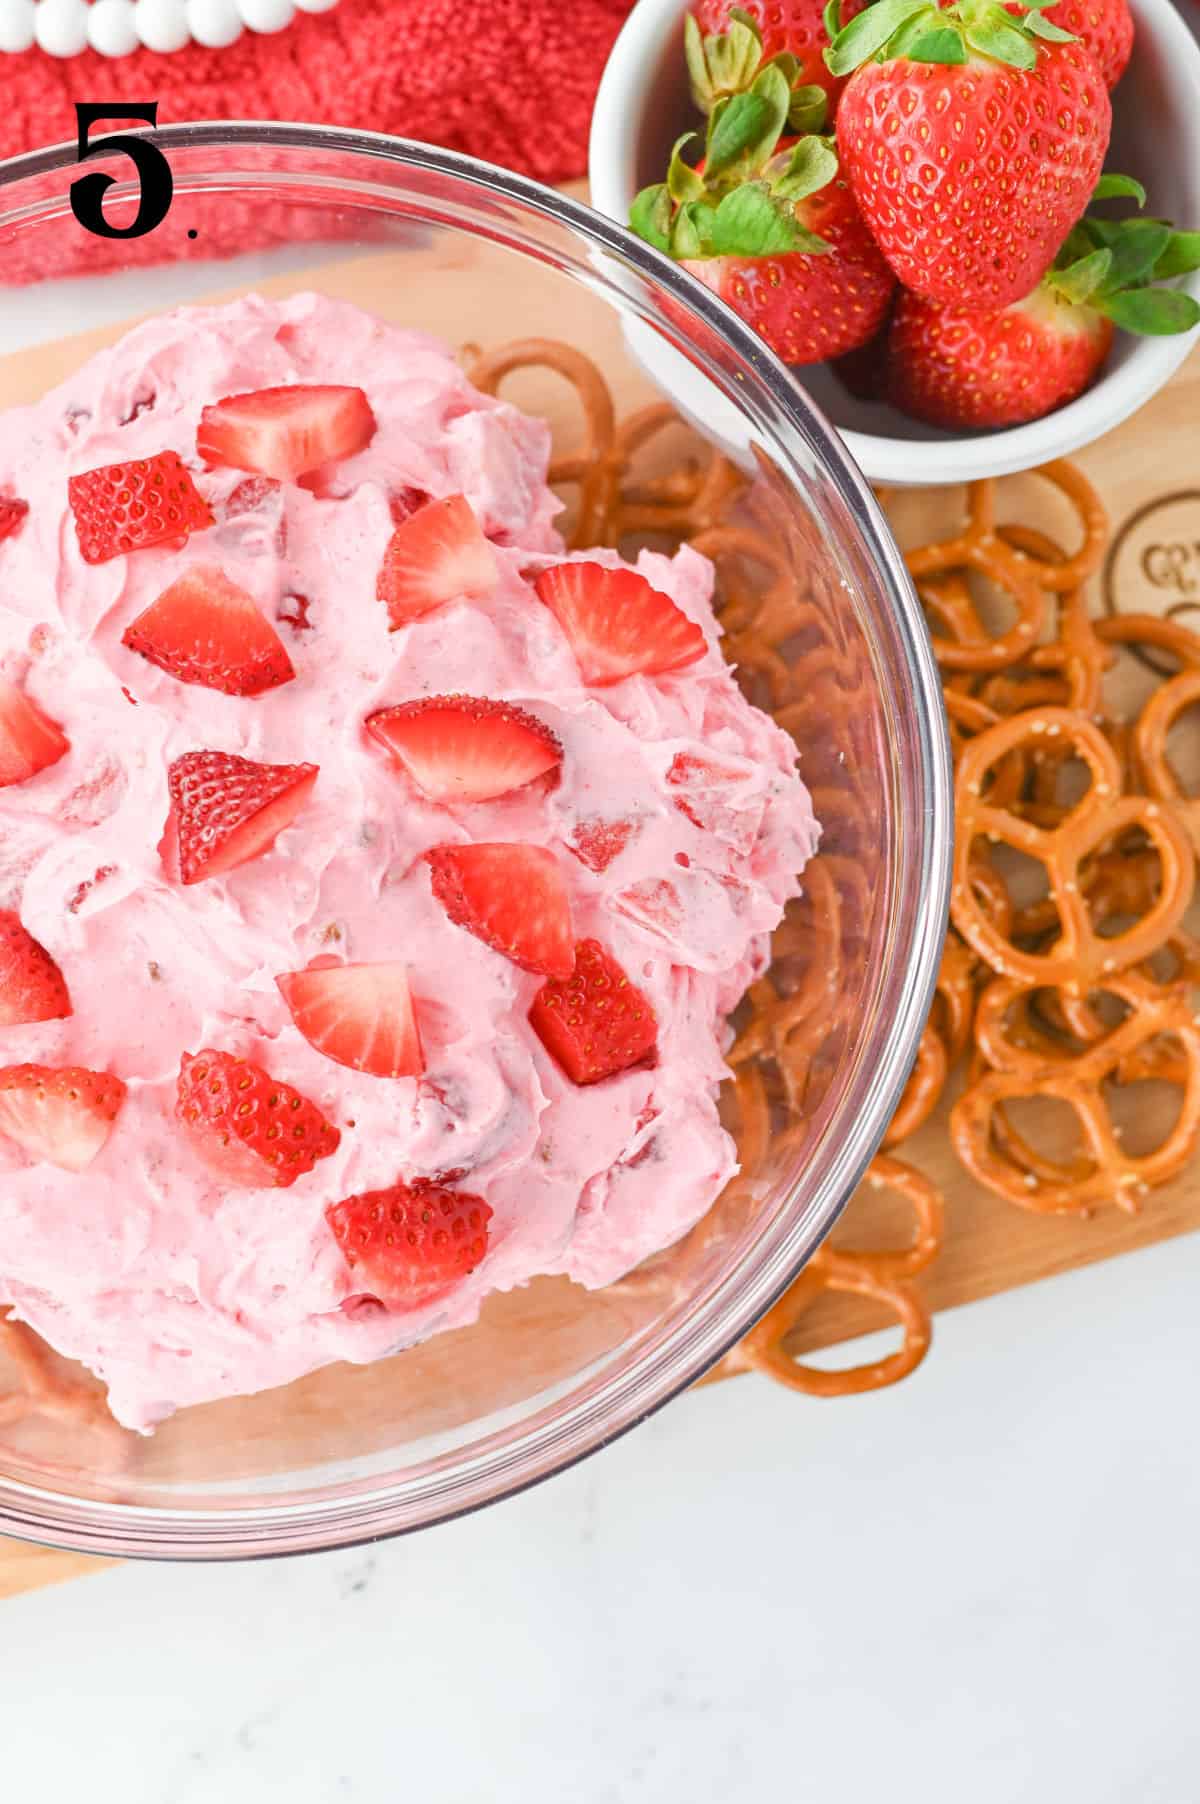 How to make Strawberry Pretzel Dip step 5 with fresh strawberries in bowl.